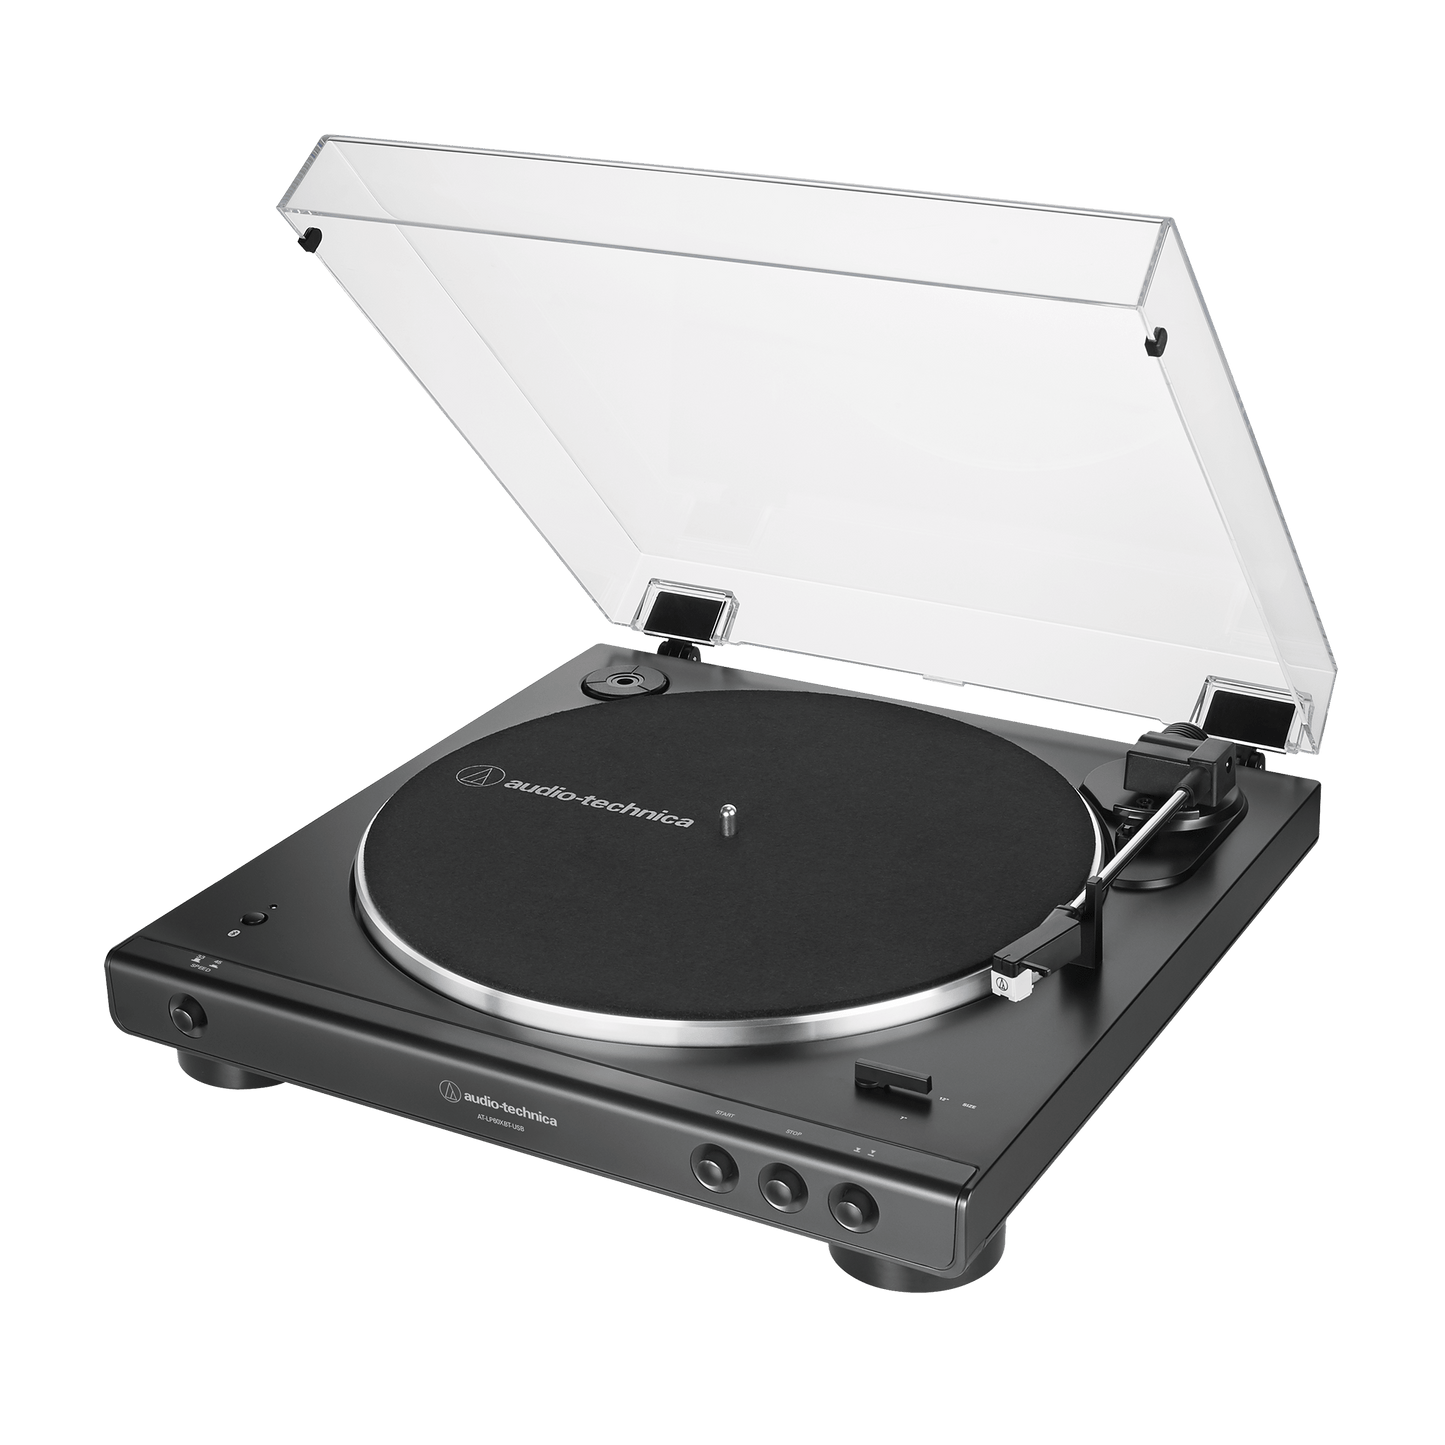 Audio-Technica AT-LP60XBT-USB Automatic Stereo Turntable